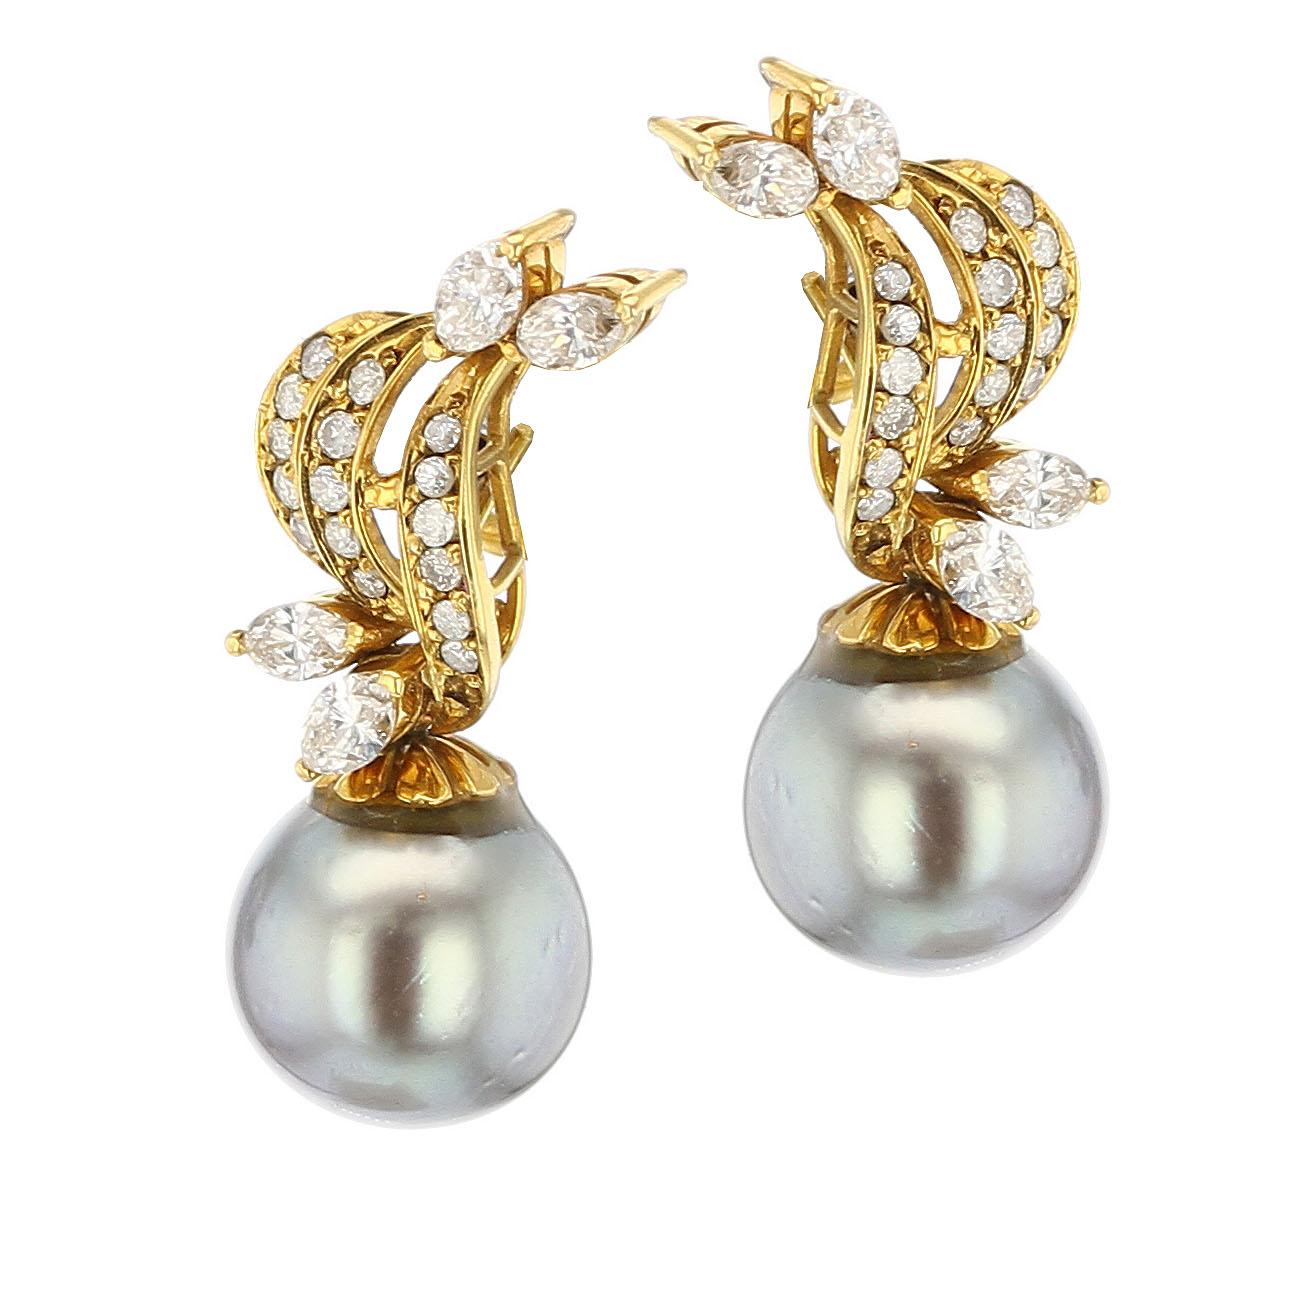 A stunning and practical pair of Gray Tahitian Cultured Pearl (appx. 11.8 MM) and Diamond Earrings in 14K Yellow Gold. The pearl is detachable, so the earrings can be worn with or without the pearl. In each earring, there are 17 round diamonds and 4